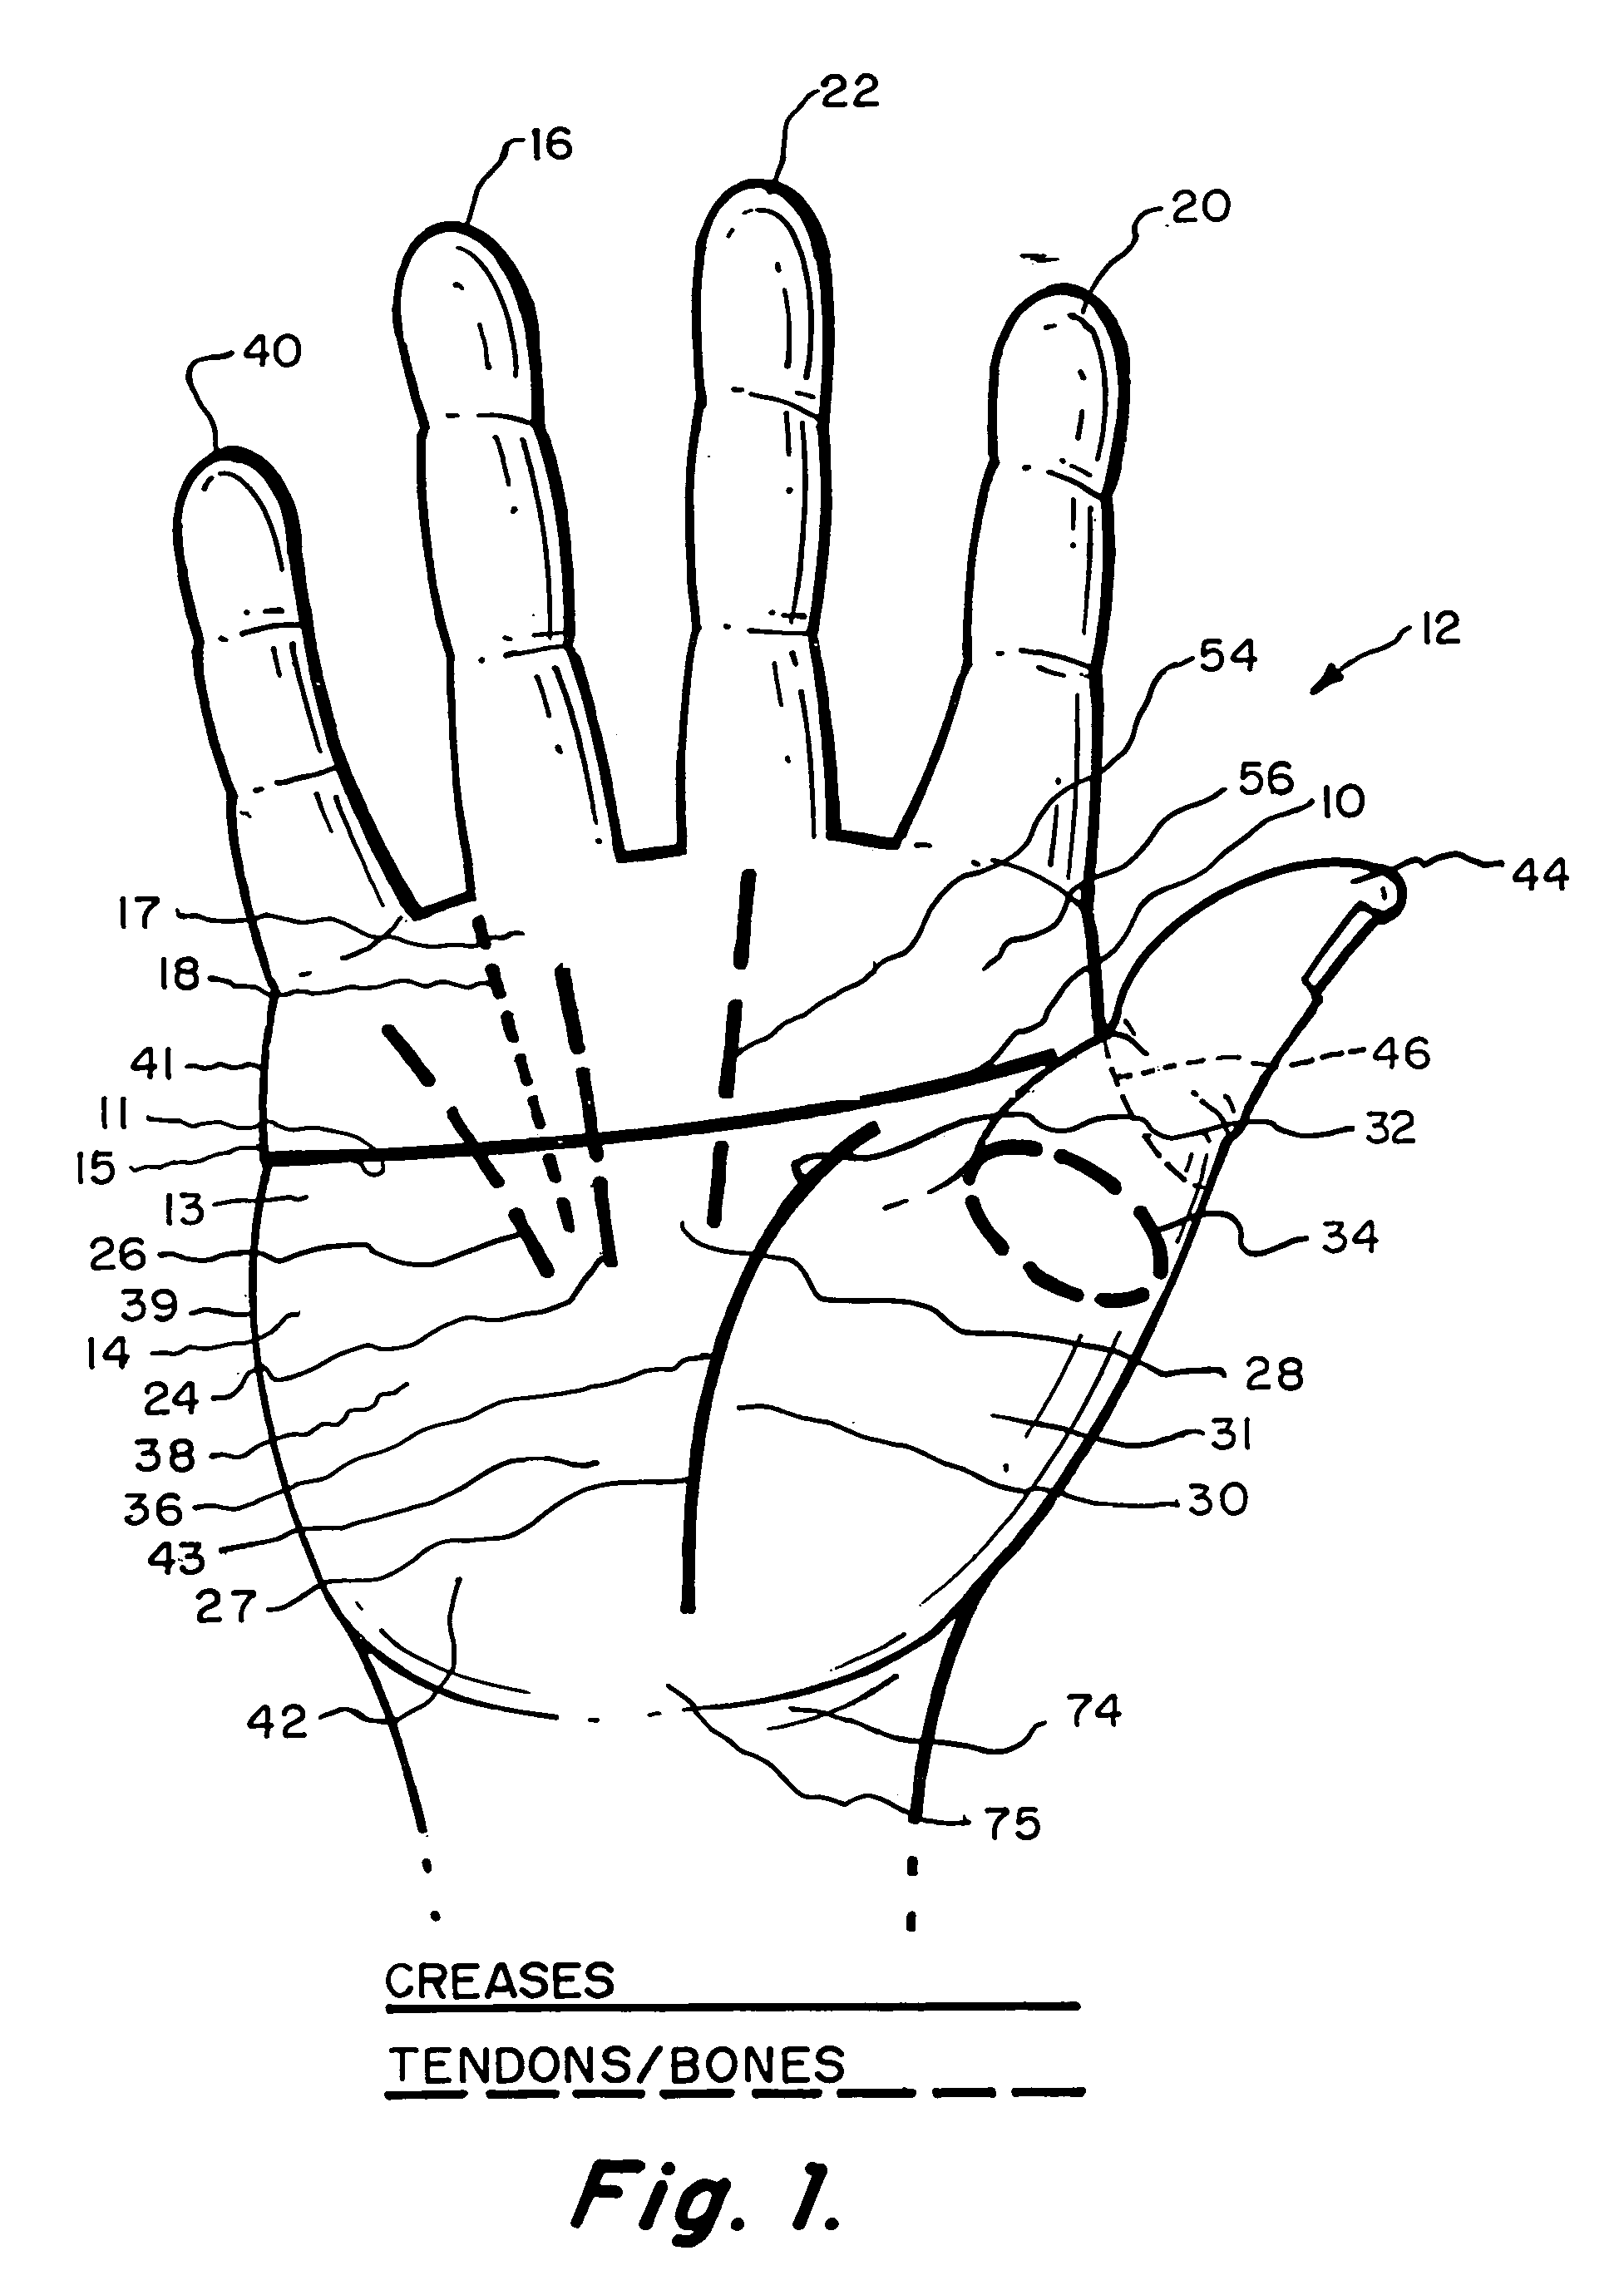 Hand accessory usable with an implement handle